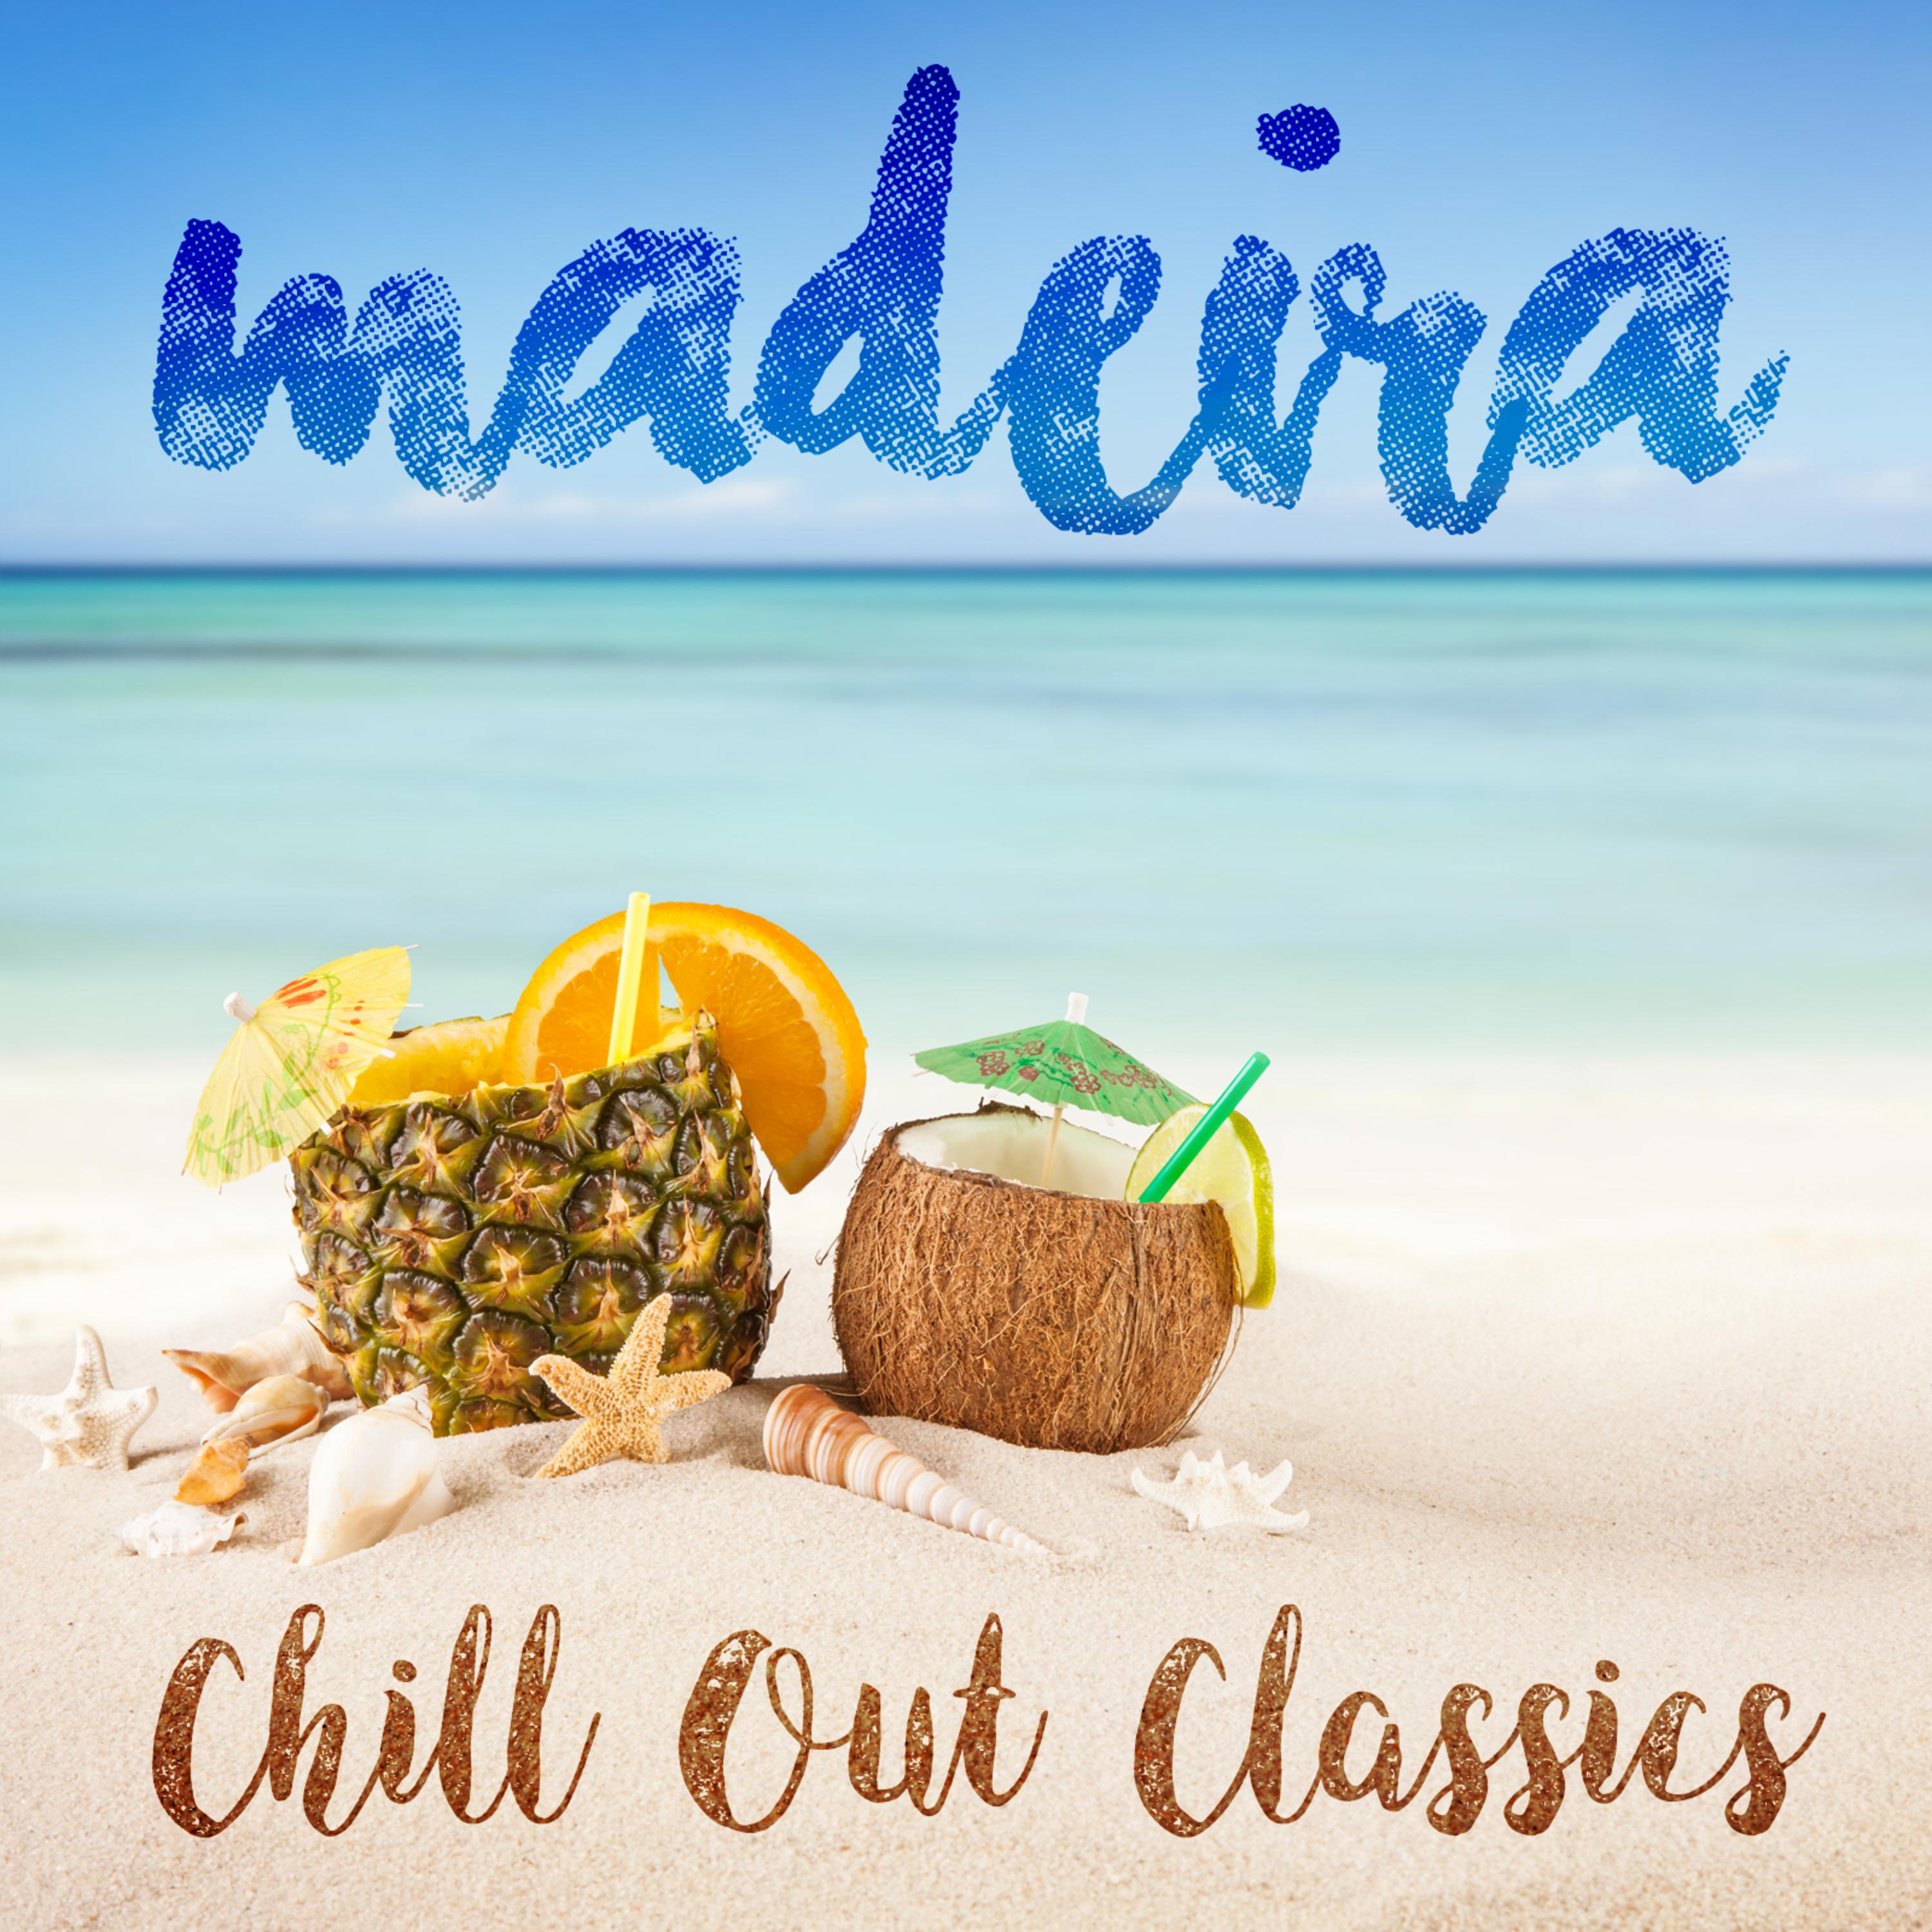 Madeira Chill out Classics